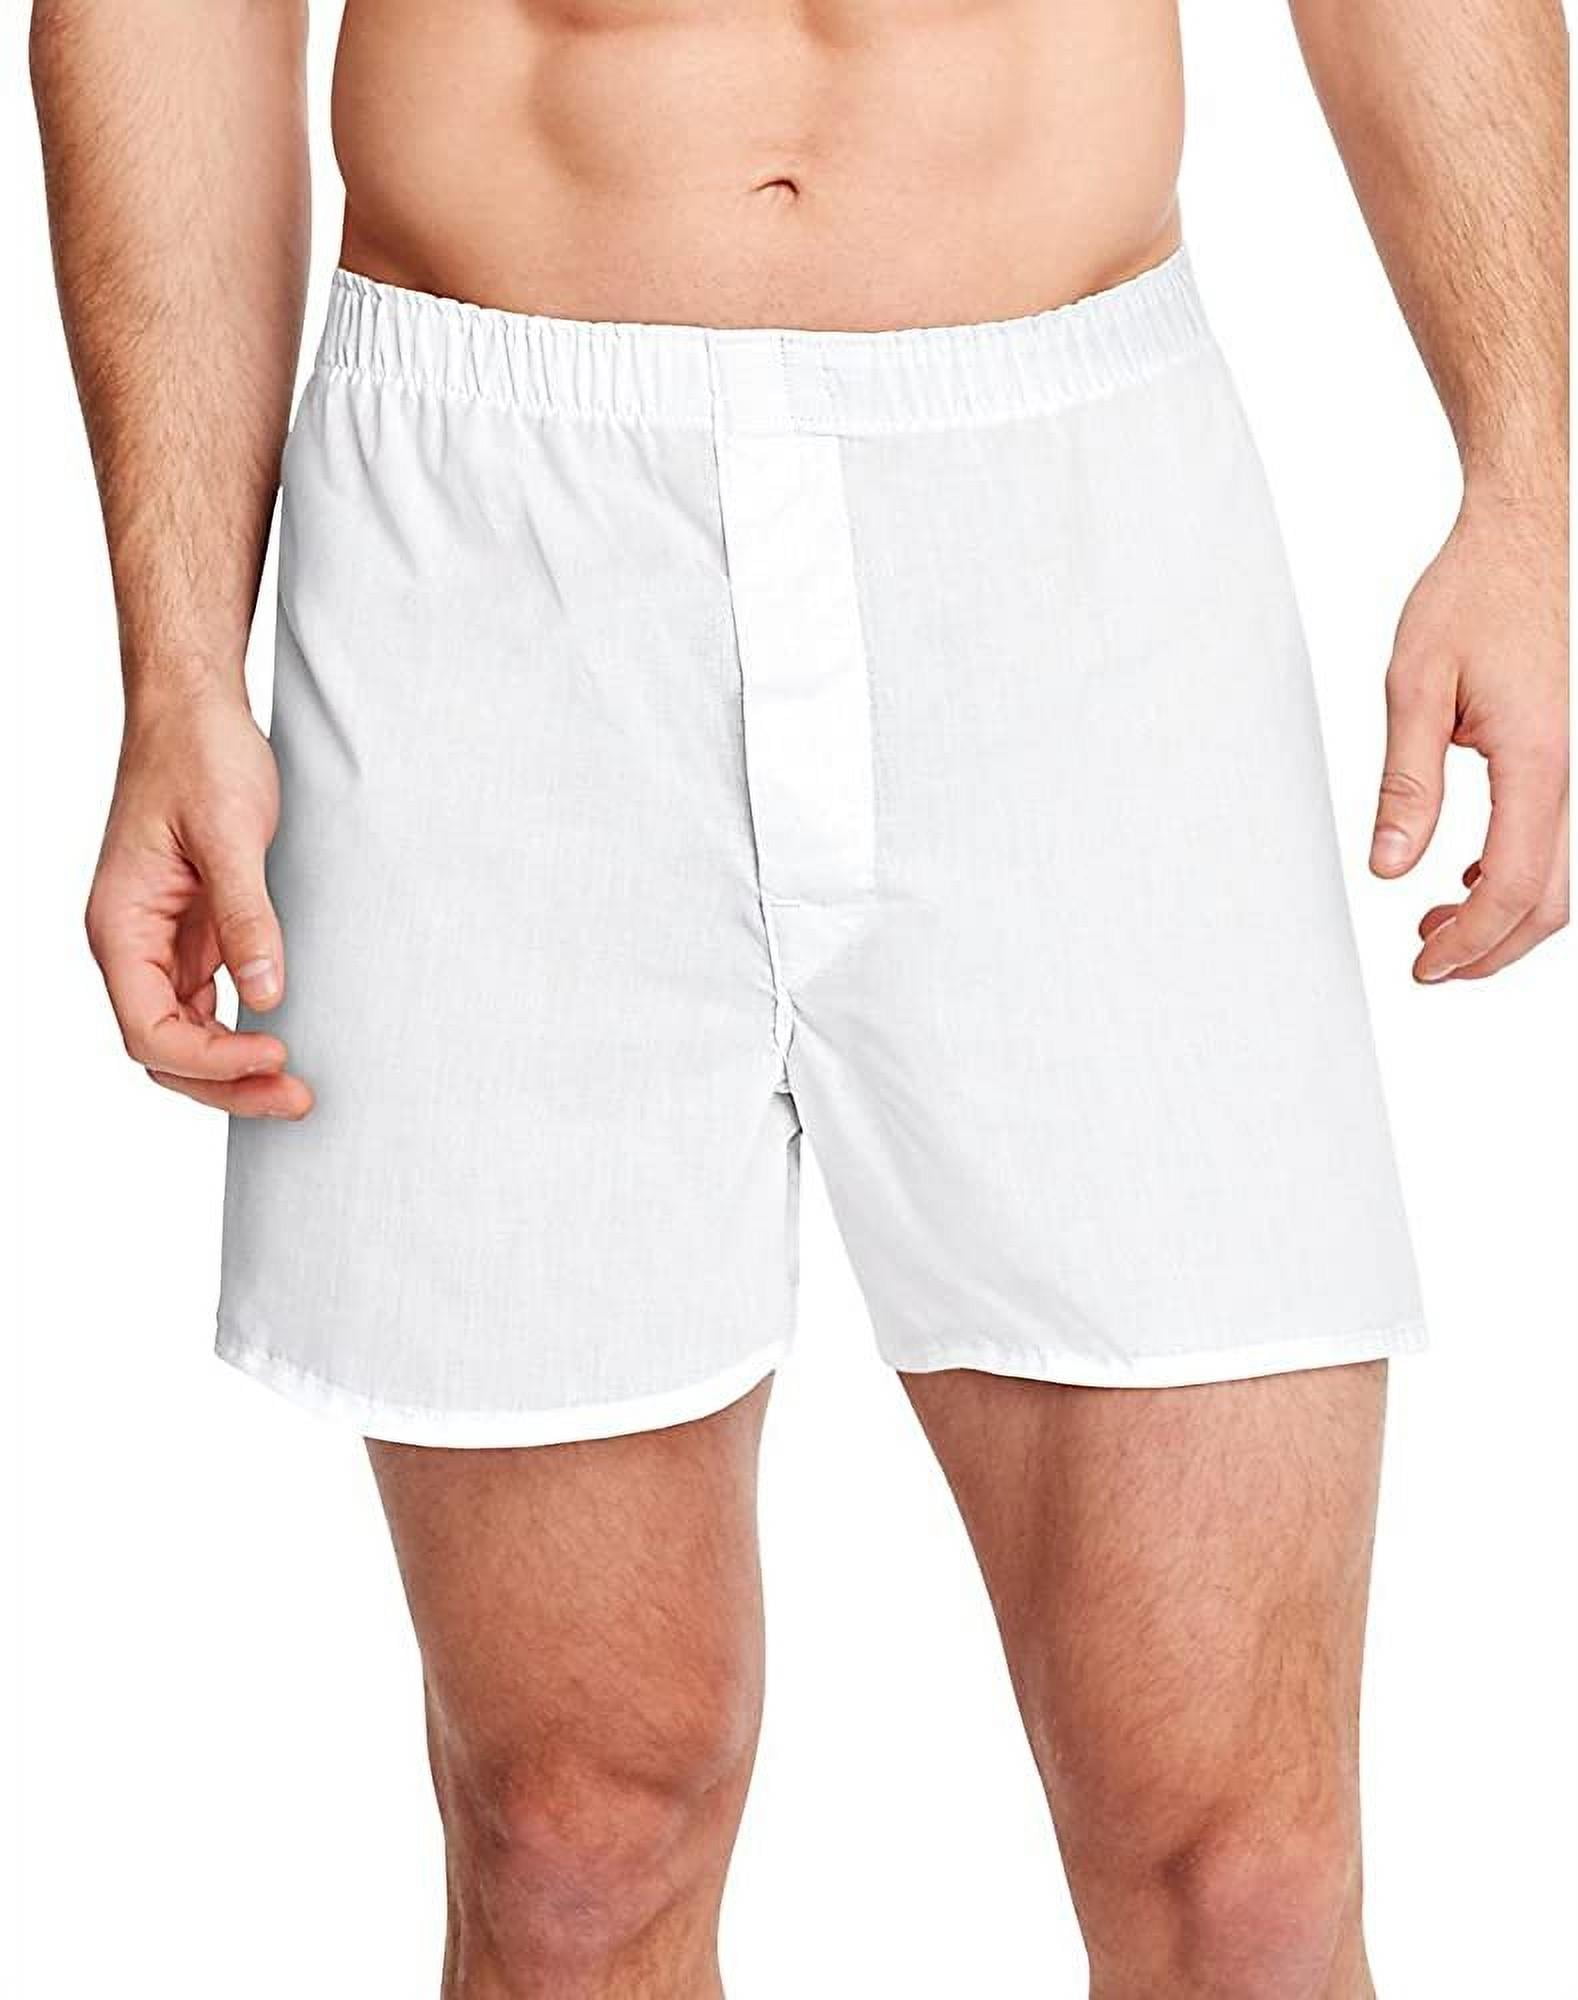 Hanes Men's Tagless Full-Cut Boxer with Comfort Flex Waistband 4-Pack ...